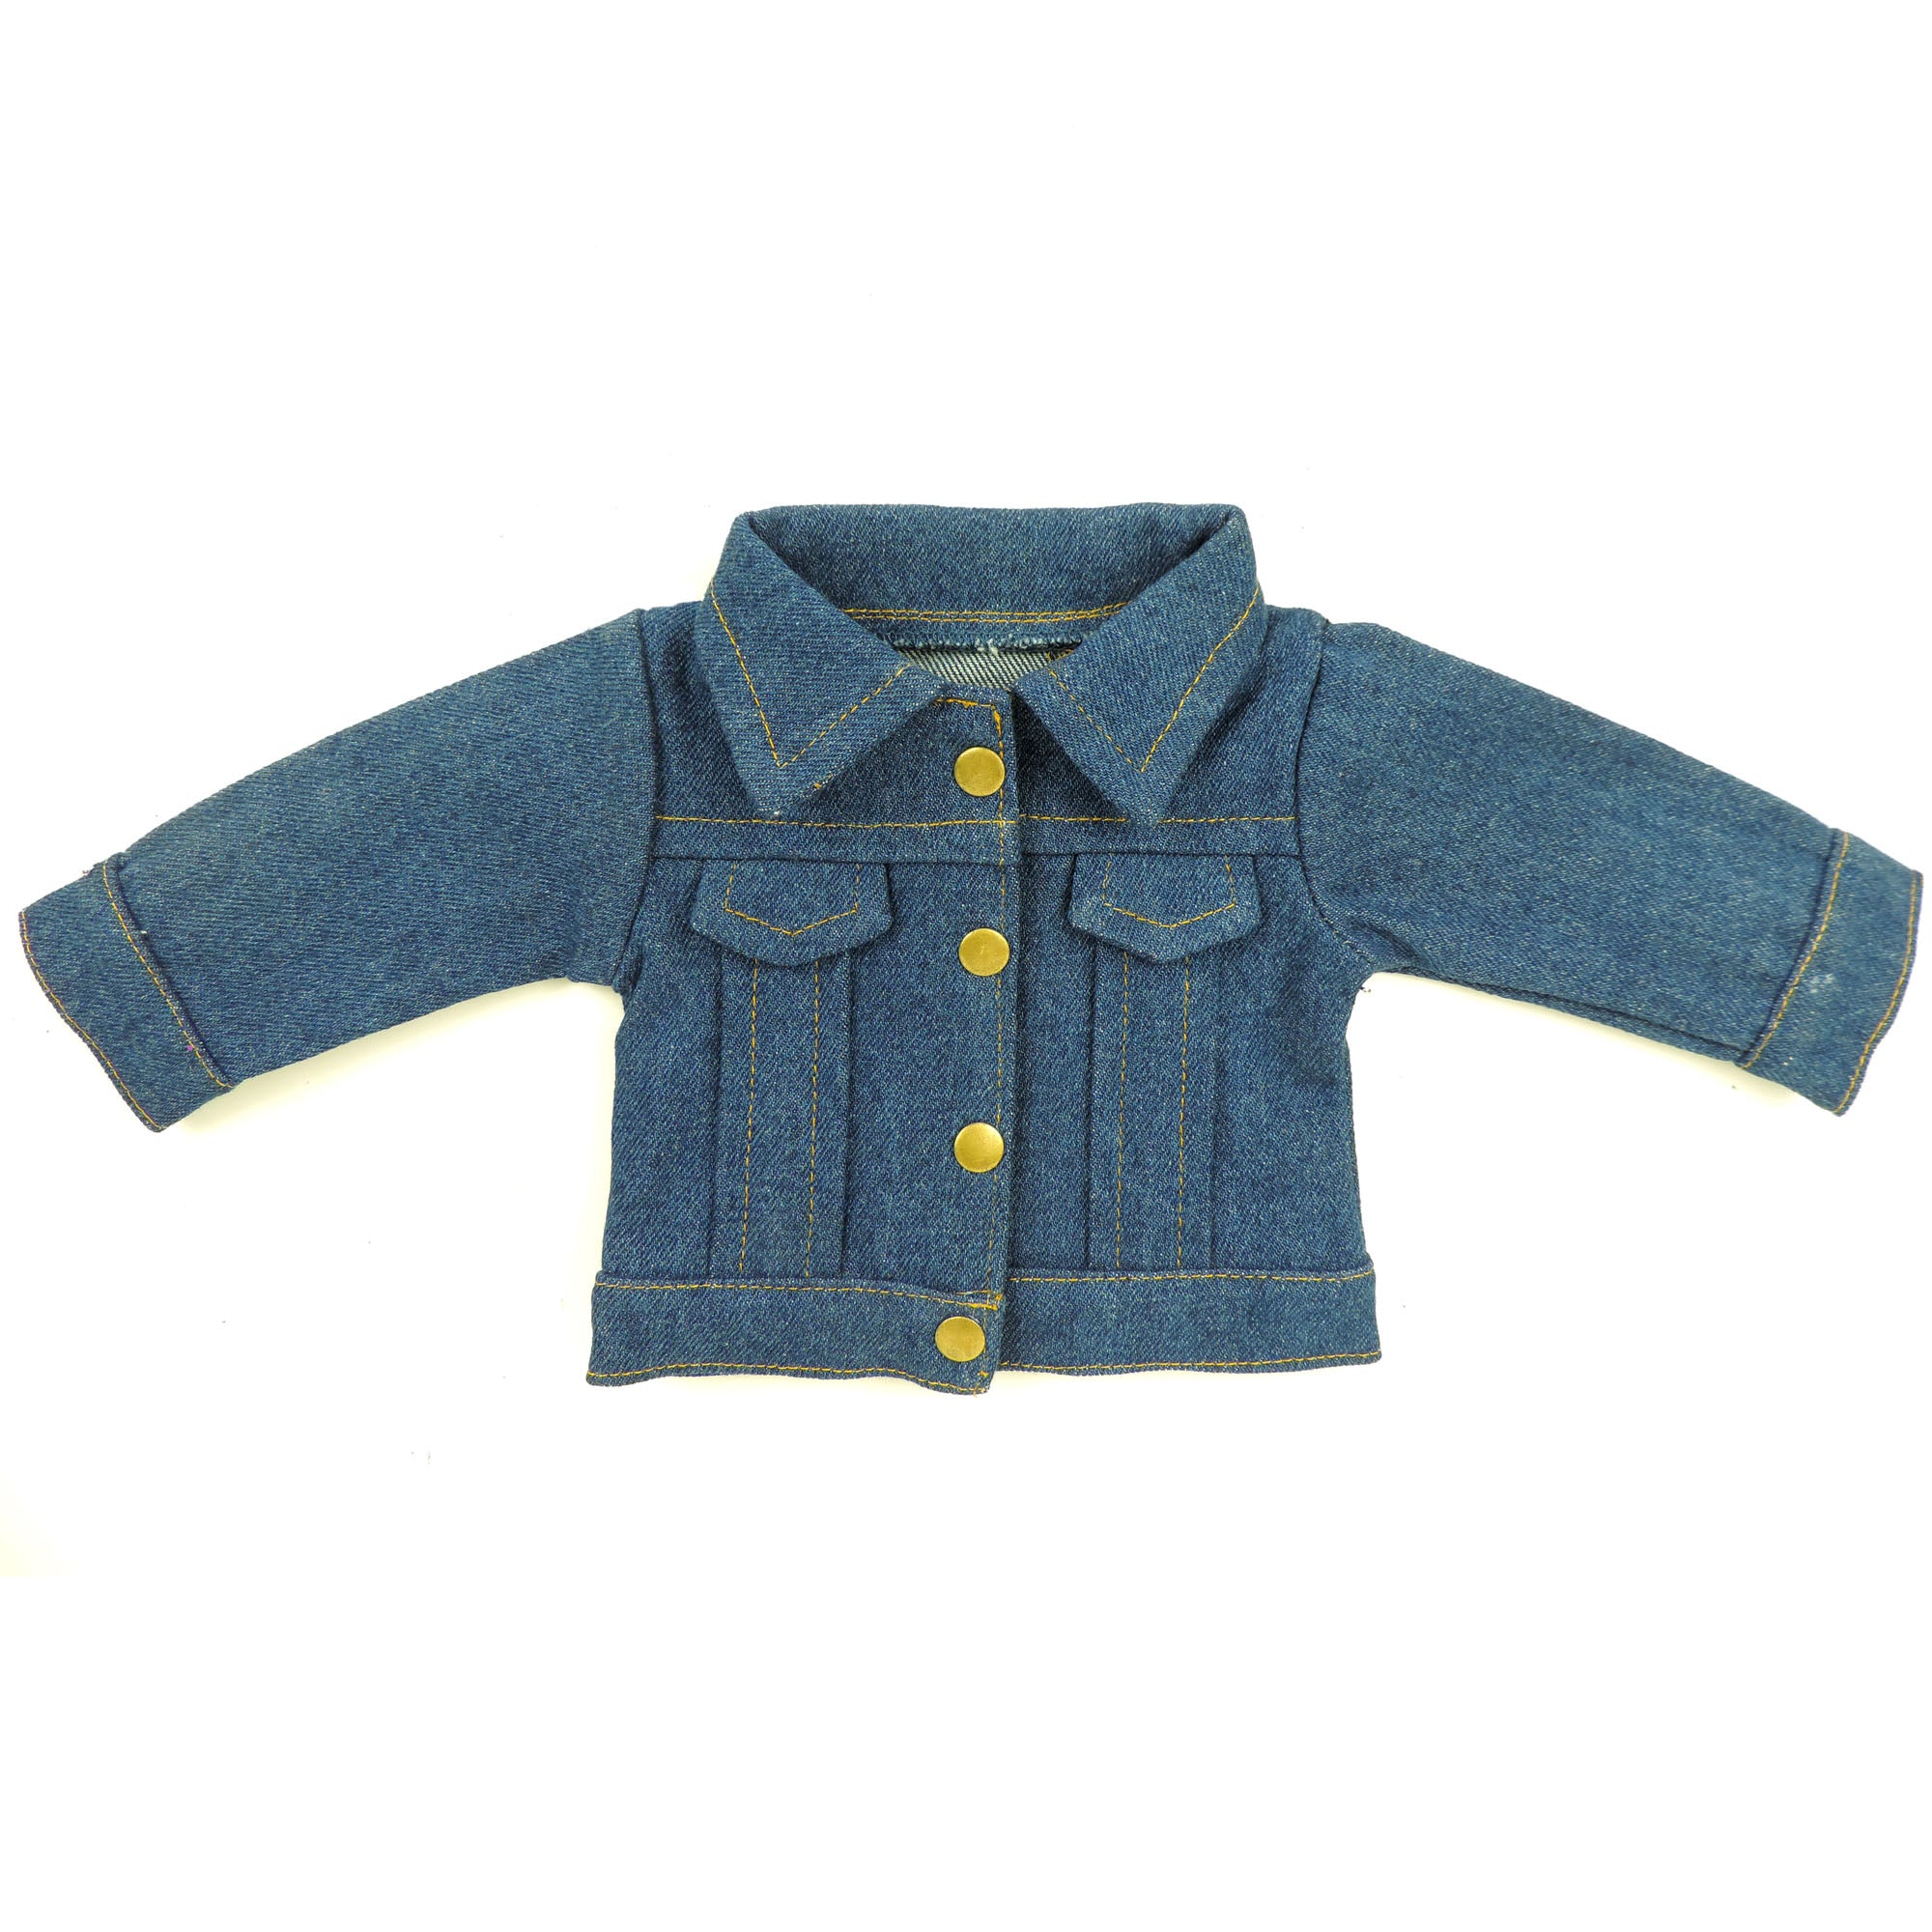 Sophia’s Gender-Neutral Mix & Match Denim Jean Jacket with Exposed Gold Stitching & Metallic Gold Buttons for 18” Dolls, Indigo Blue